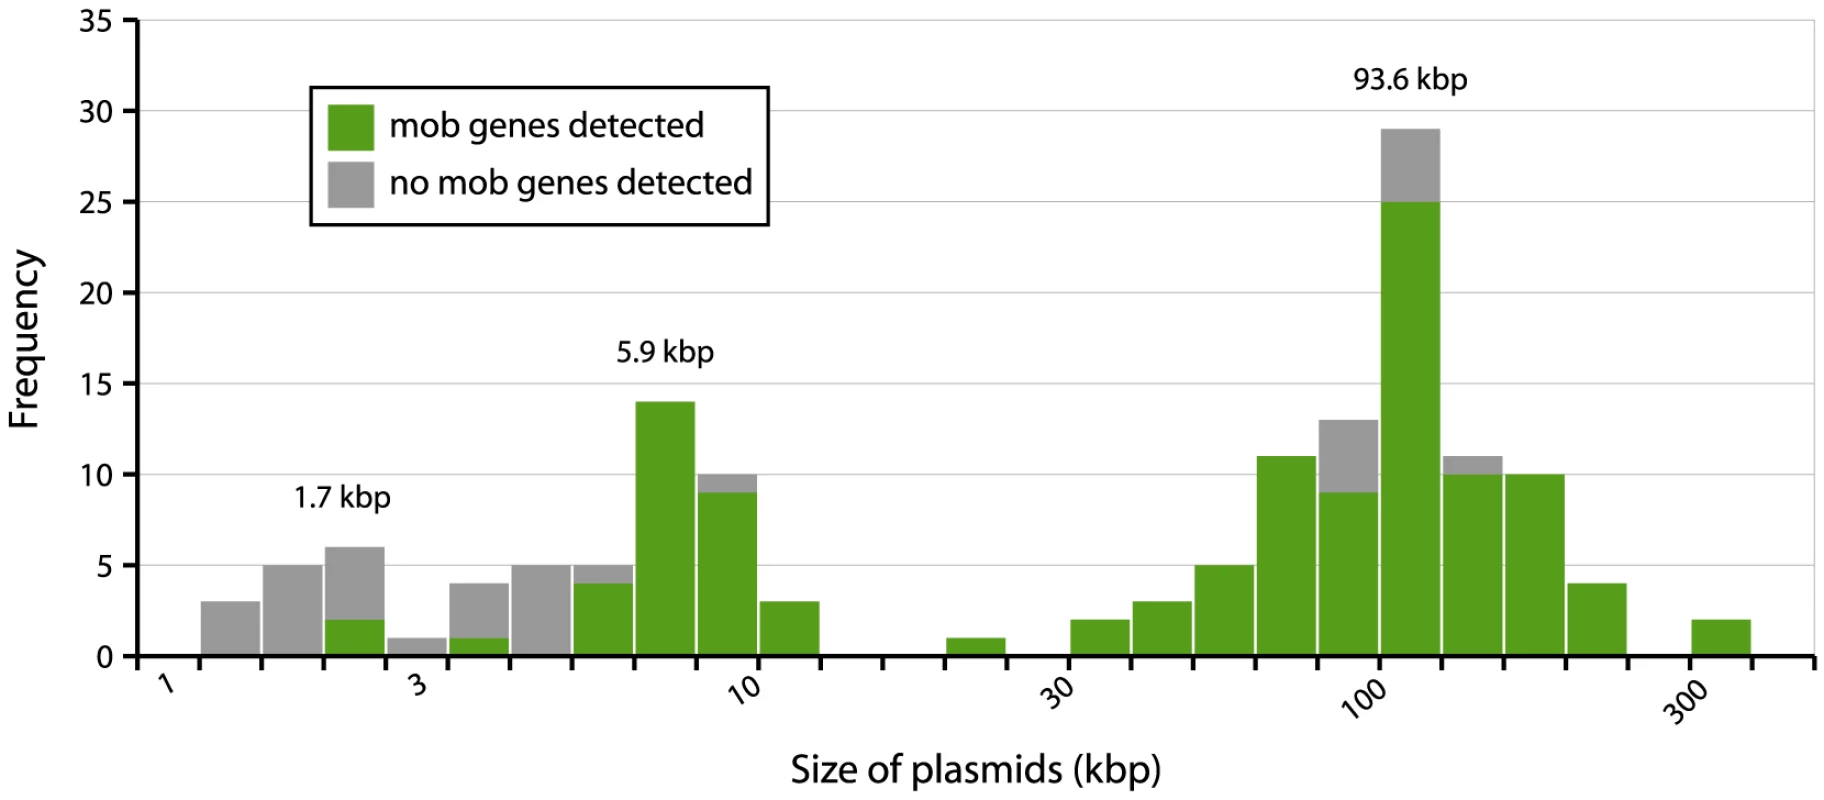 Distribution of plasmid sizes in the collection of 32 sequenced <i>E. coli</i> strains.